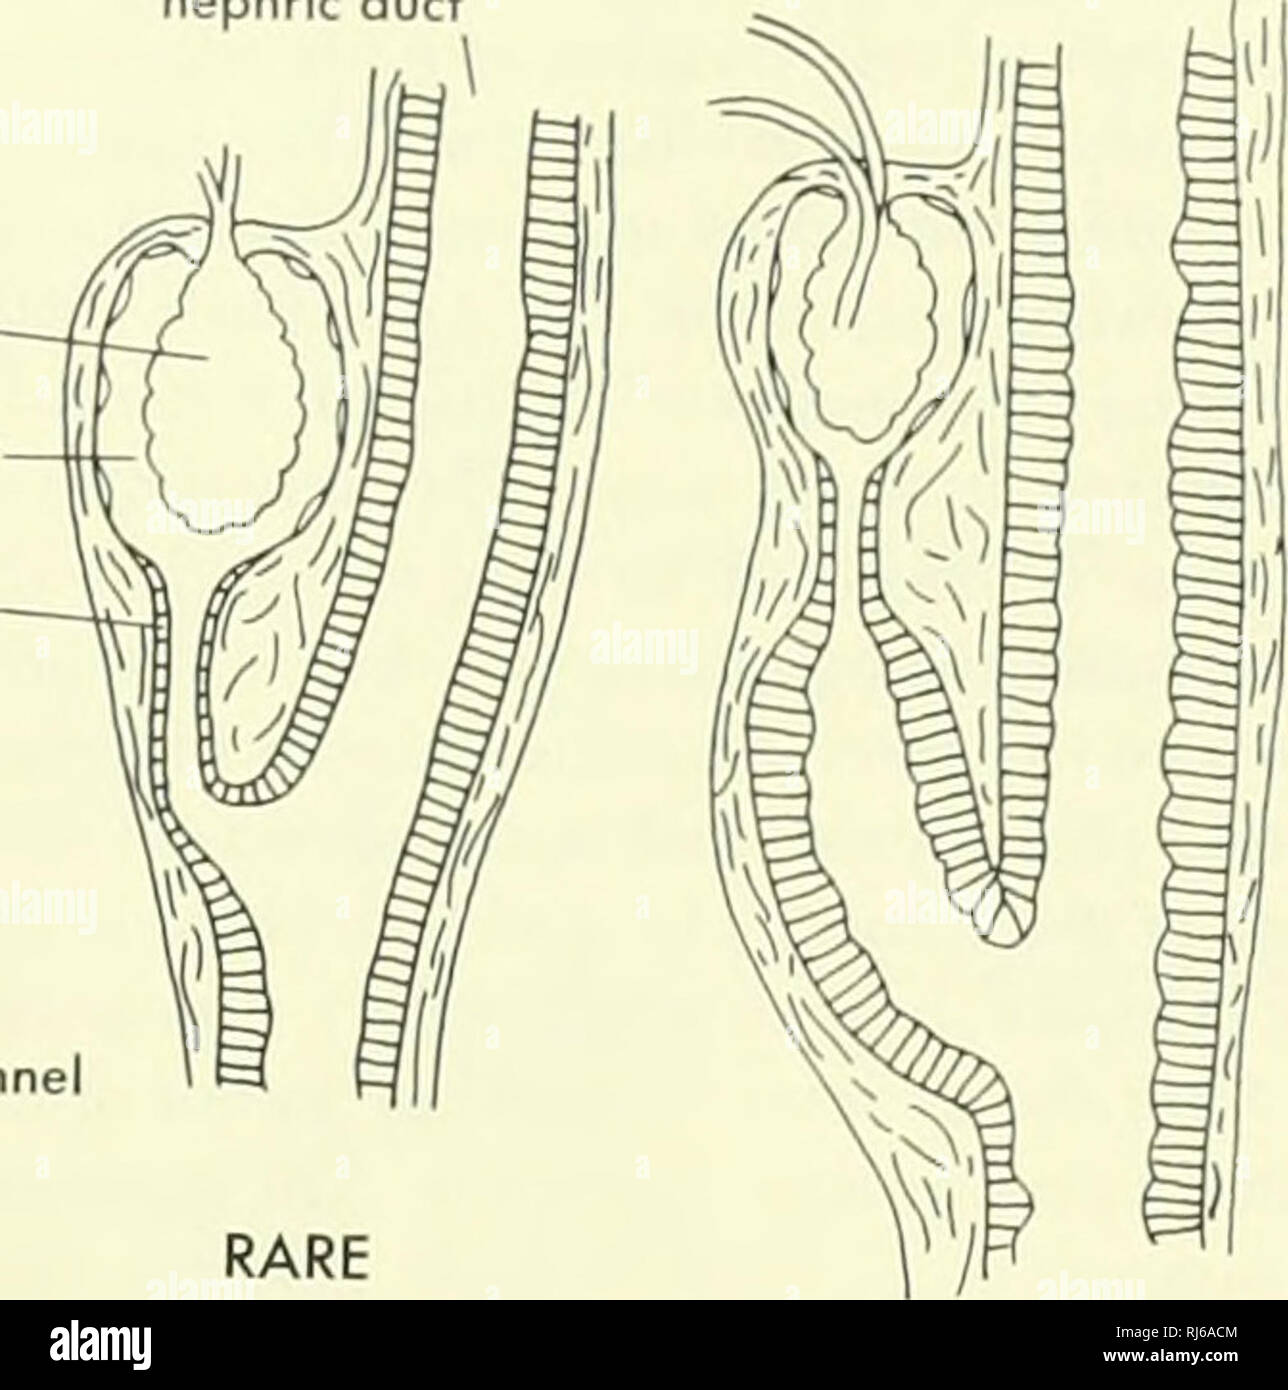 . Chordate morphology. Morphology (Animals); Chordata. left pronephros duct of Cuvier nephrtc duct kidney glomerulus Bowmon's capsule neck section     y^ 2=srE;32jj^  segmental artery posterior cardinal (subcordinol) channel segmental vein segmental nerve. USUAL B dorsal aorta Figure 10-30. Kidney of Myxine. A, anterior end of kidney as seen from below, and relationships to blood vessels; B, two types of tubules observed in the adult kidney. (A after Marinelli and Strenger, 1956; B after Conel, 1917) lost and the coelom extends to what was their medial walls. Segmental funnels form and the cav Stock Photo